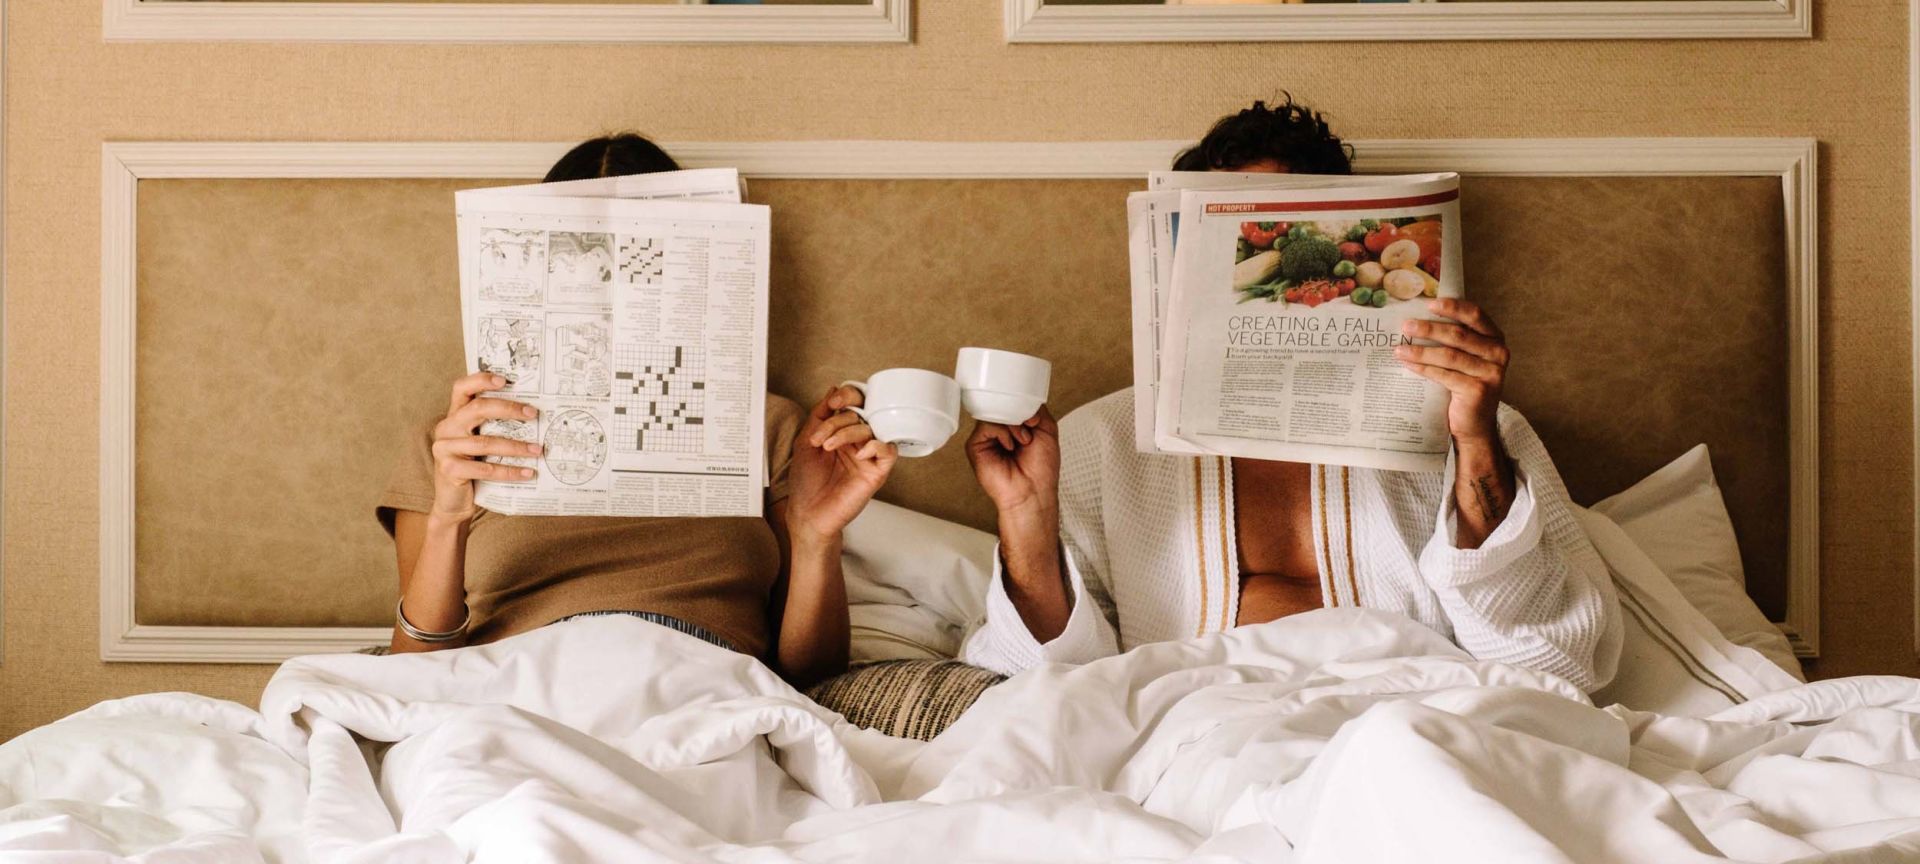 A Person Reading A Newspaper On A Bed